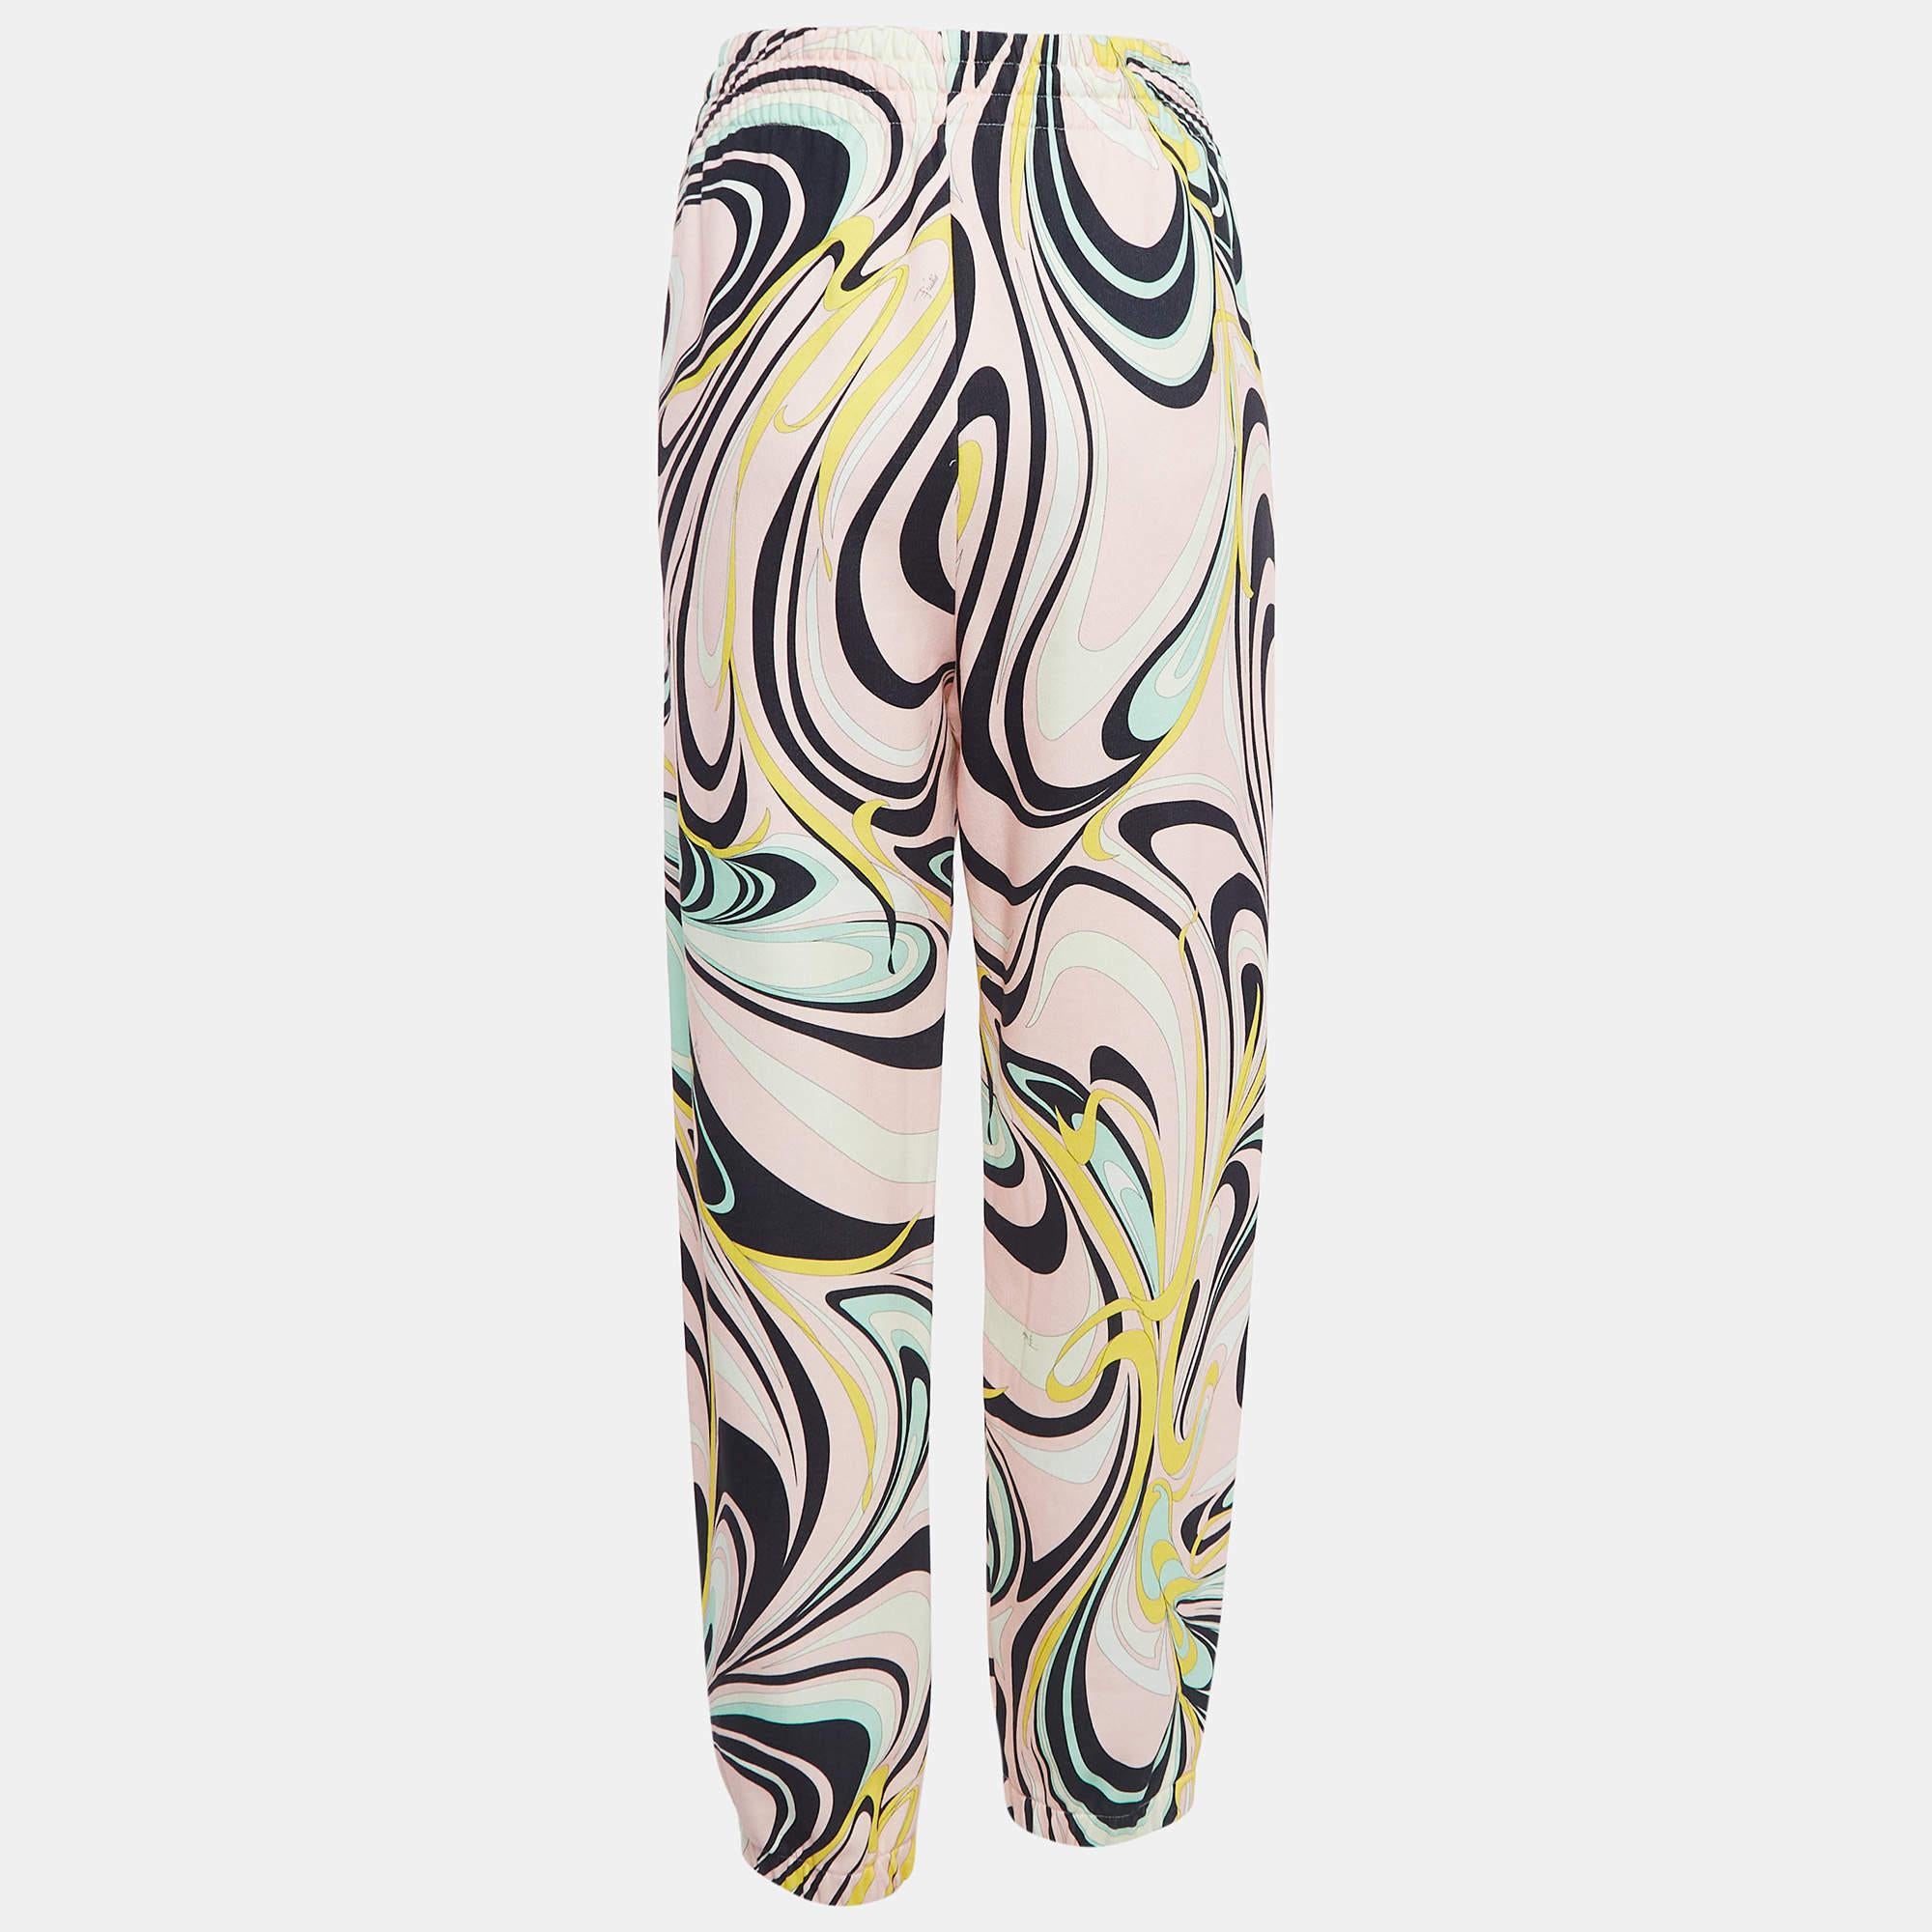 Track pants like these from Emilio Pucci are a fine addition to any wardrobe. They are made from cotton and showcase signature prints.

